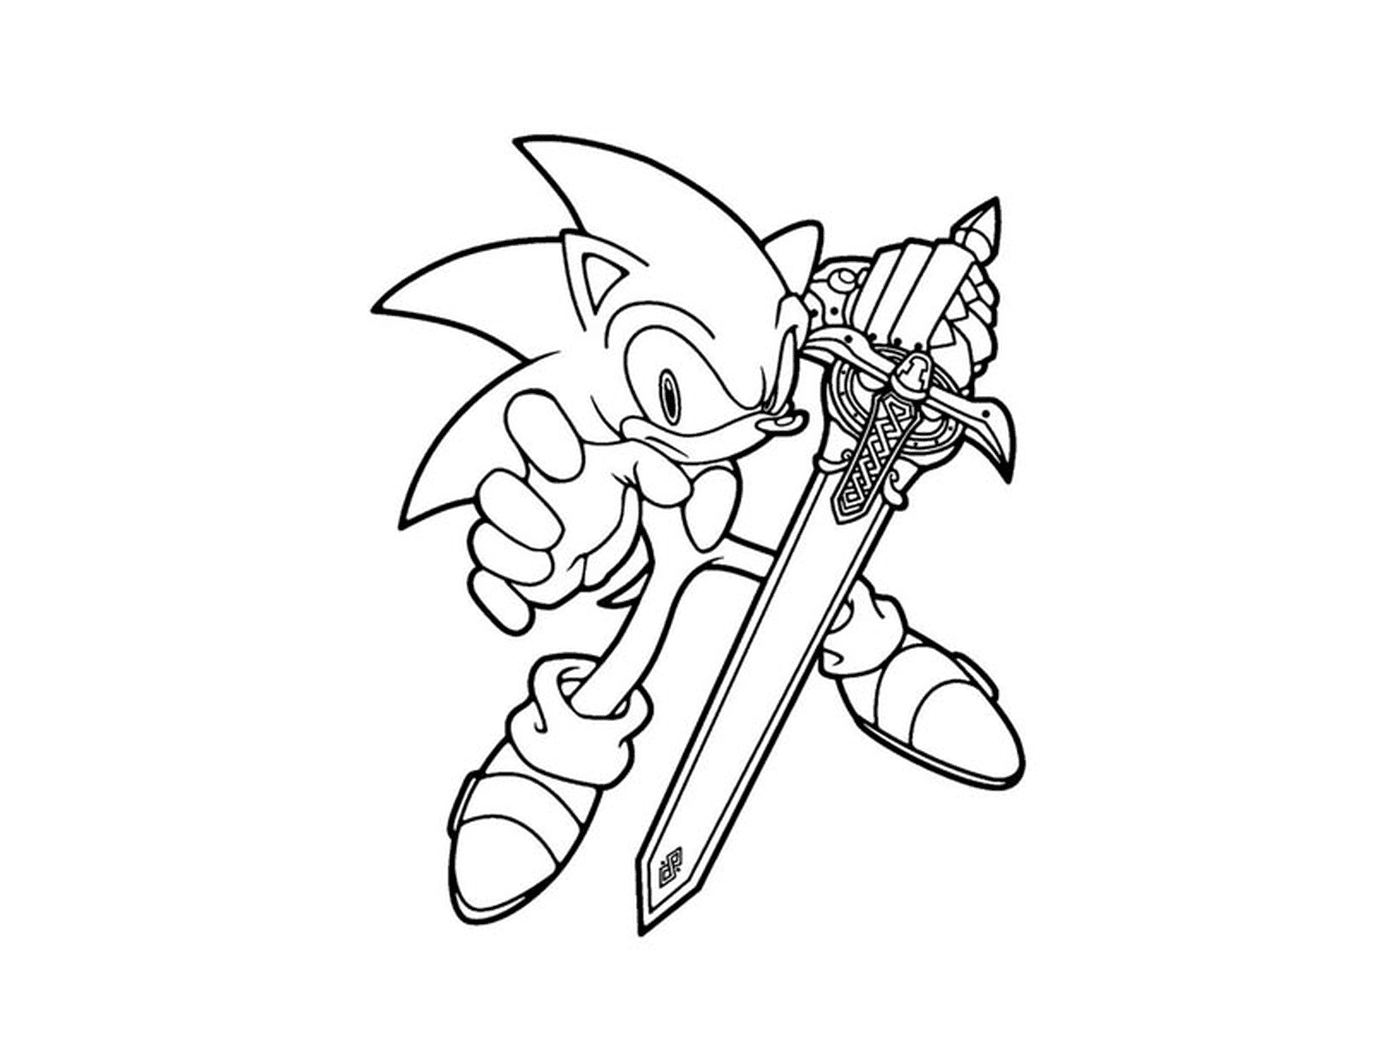  Sonic holding a sword 